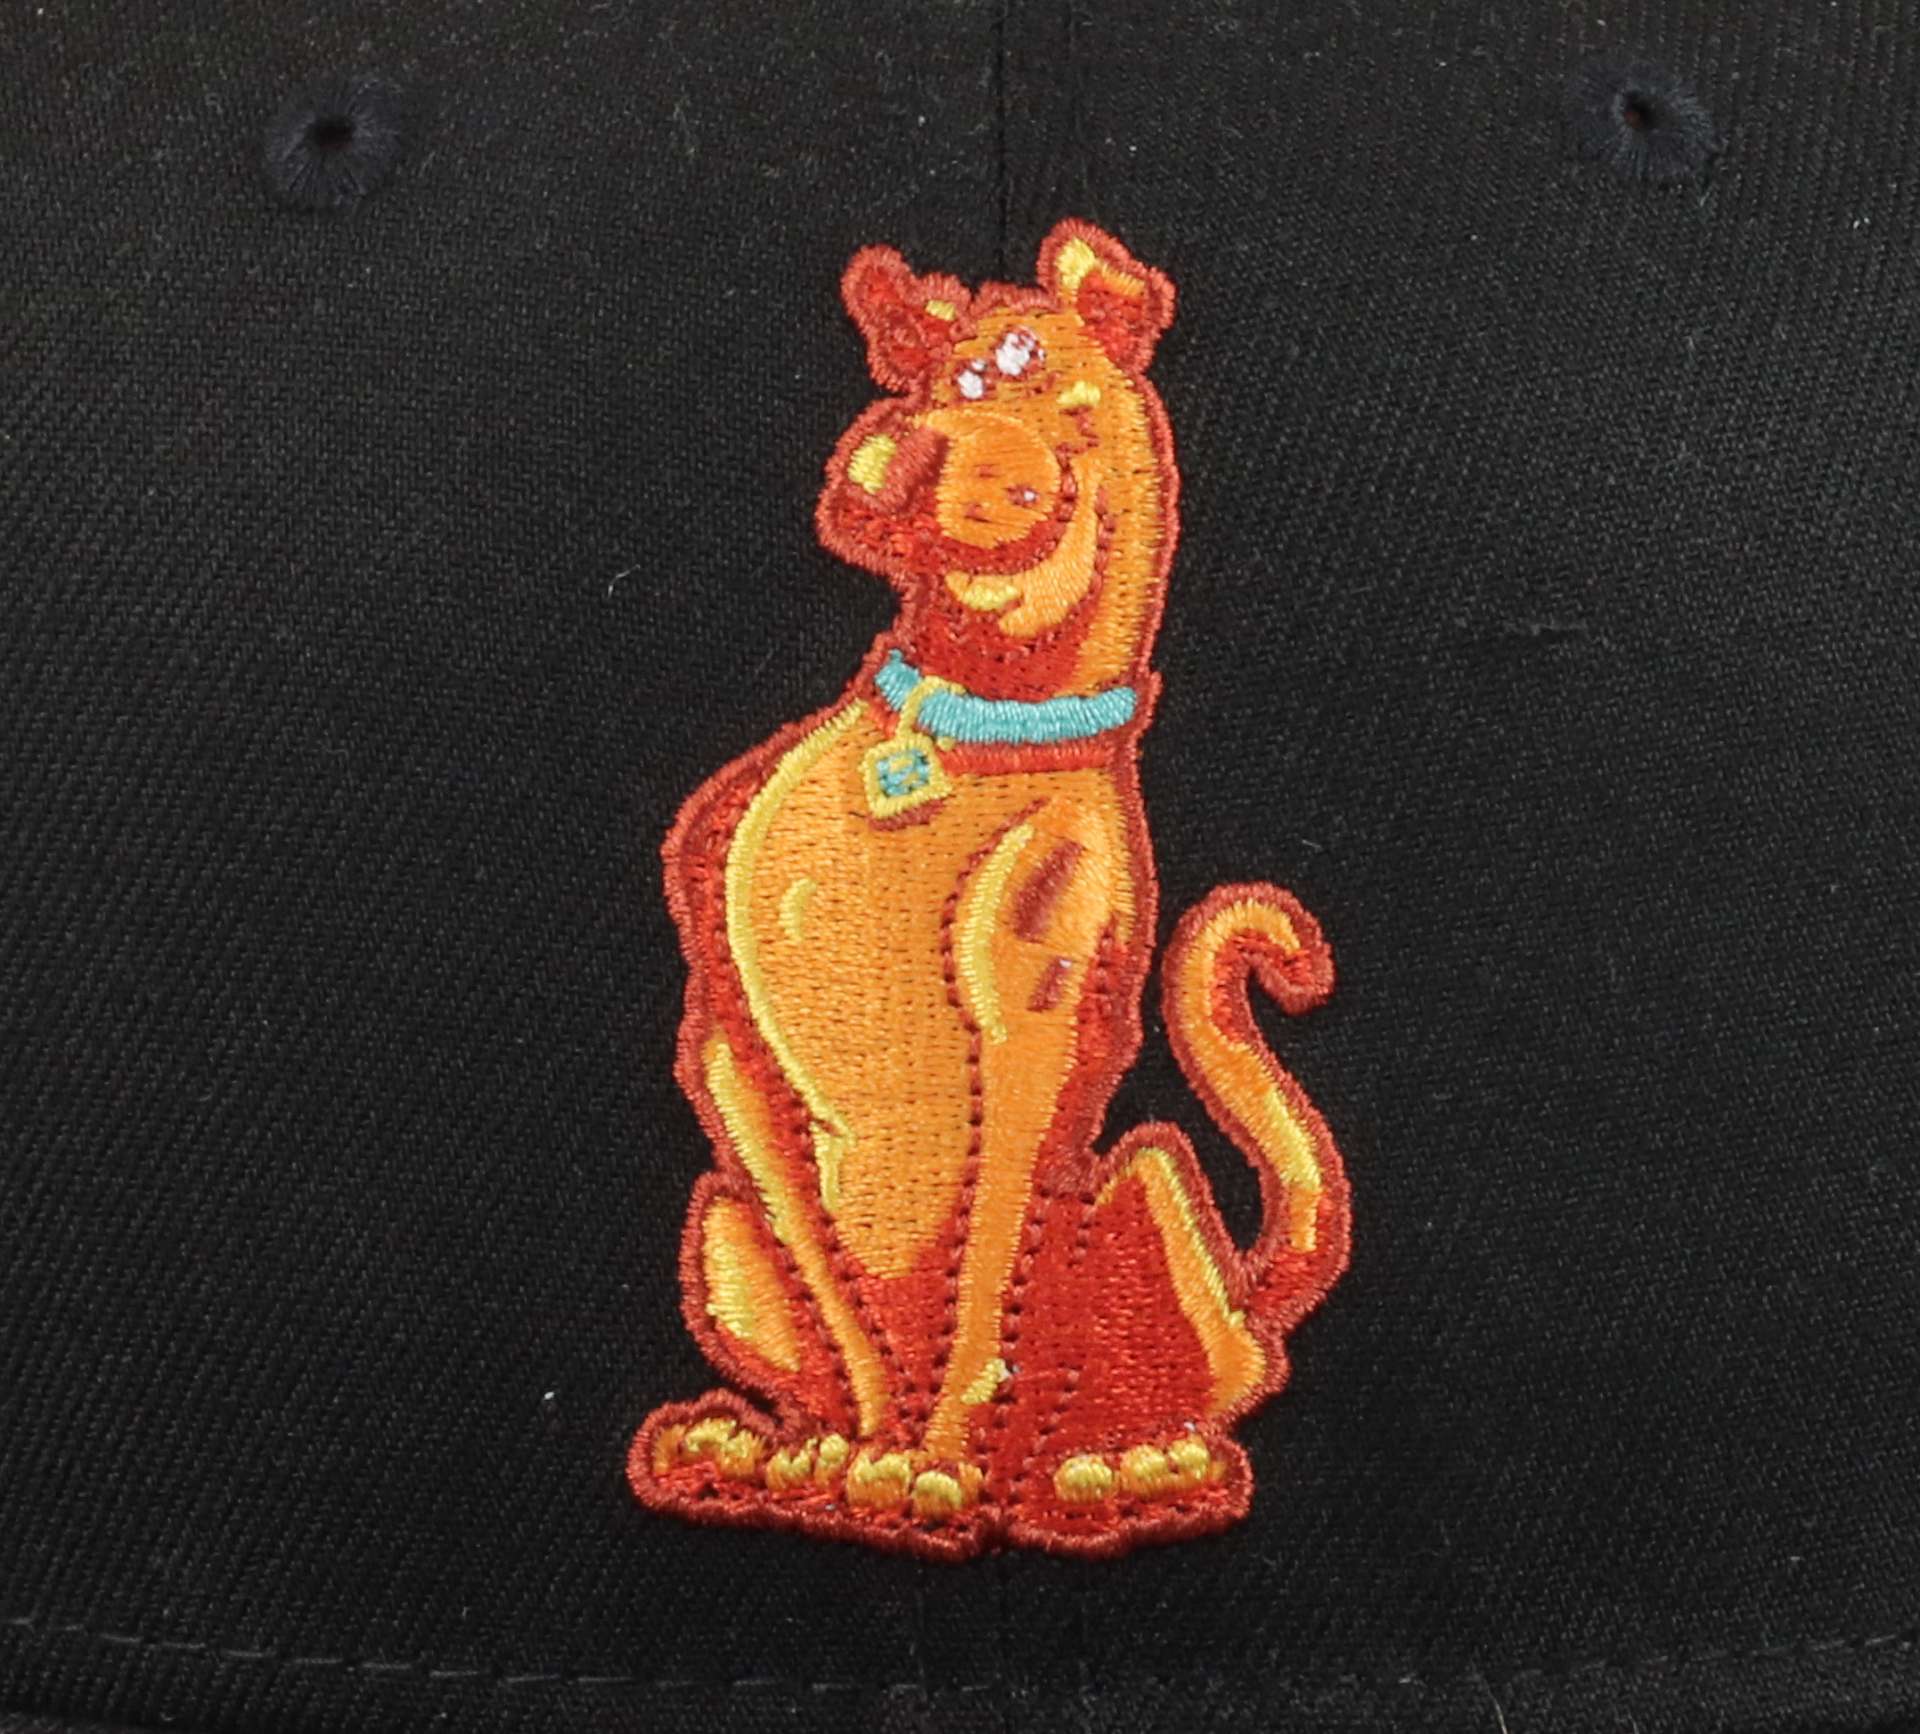 Scooby-Doo Black  59Fifty Fitted Basecap New Era